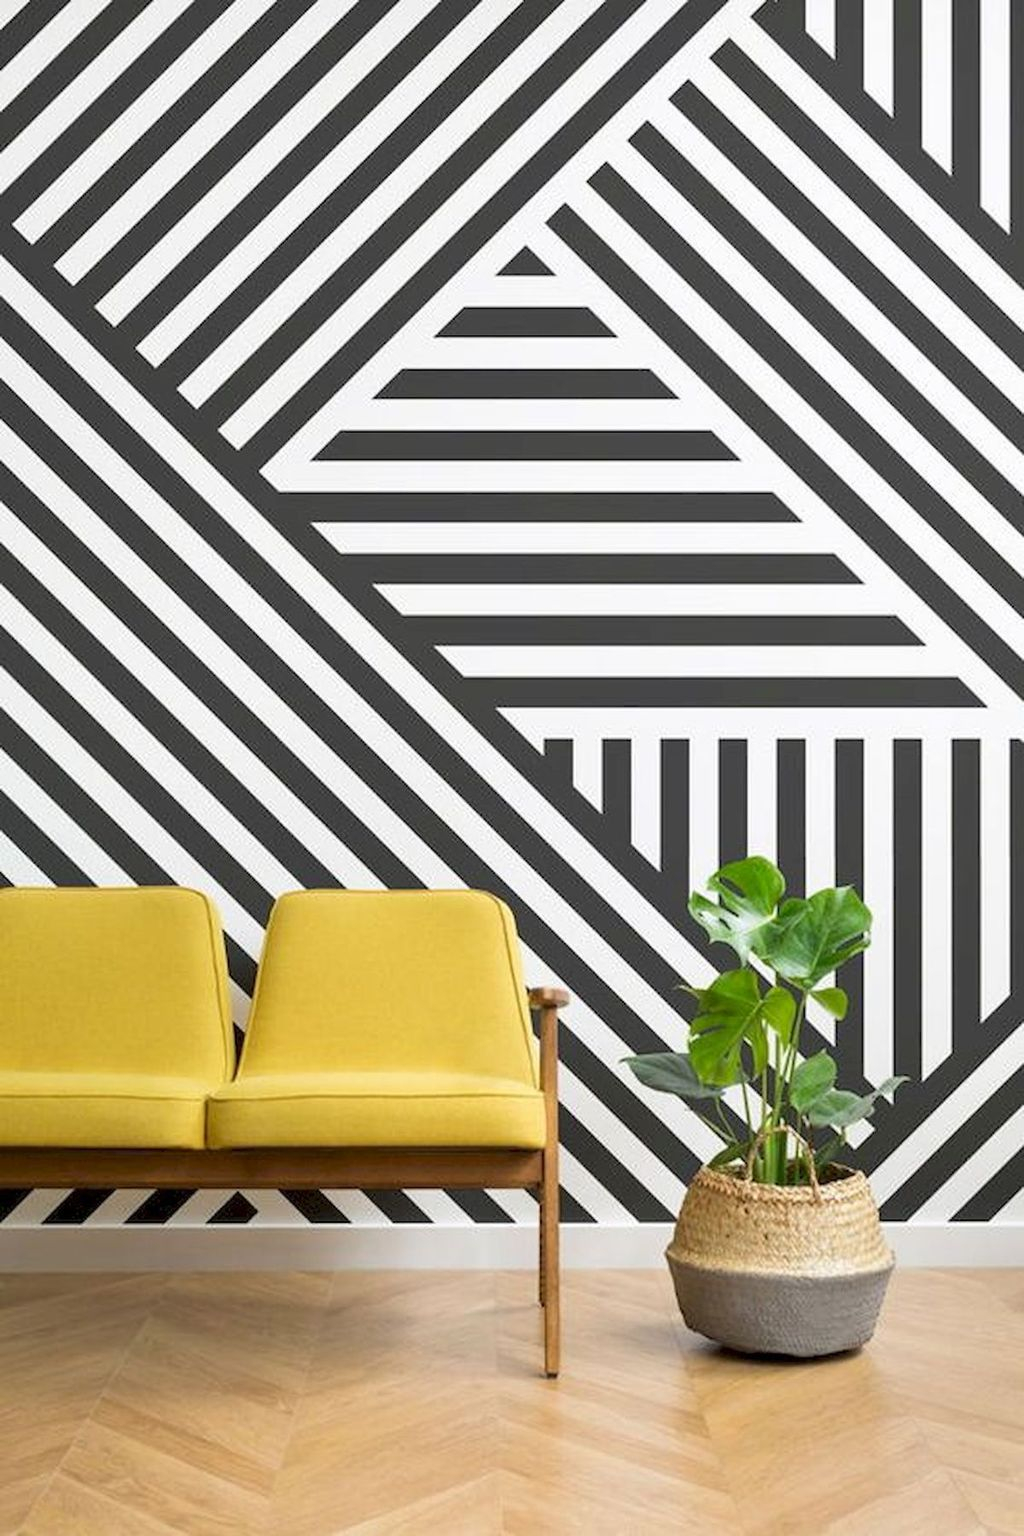 39 Awesome Striped Painted Wall Design And Decorating Ideas